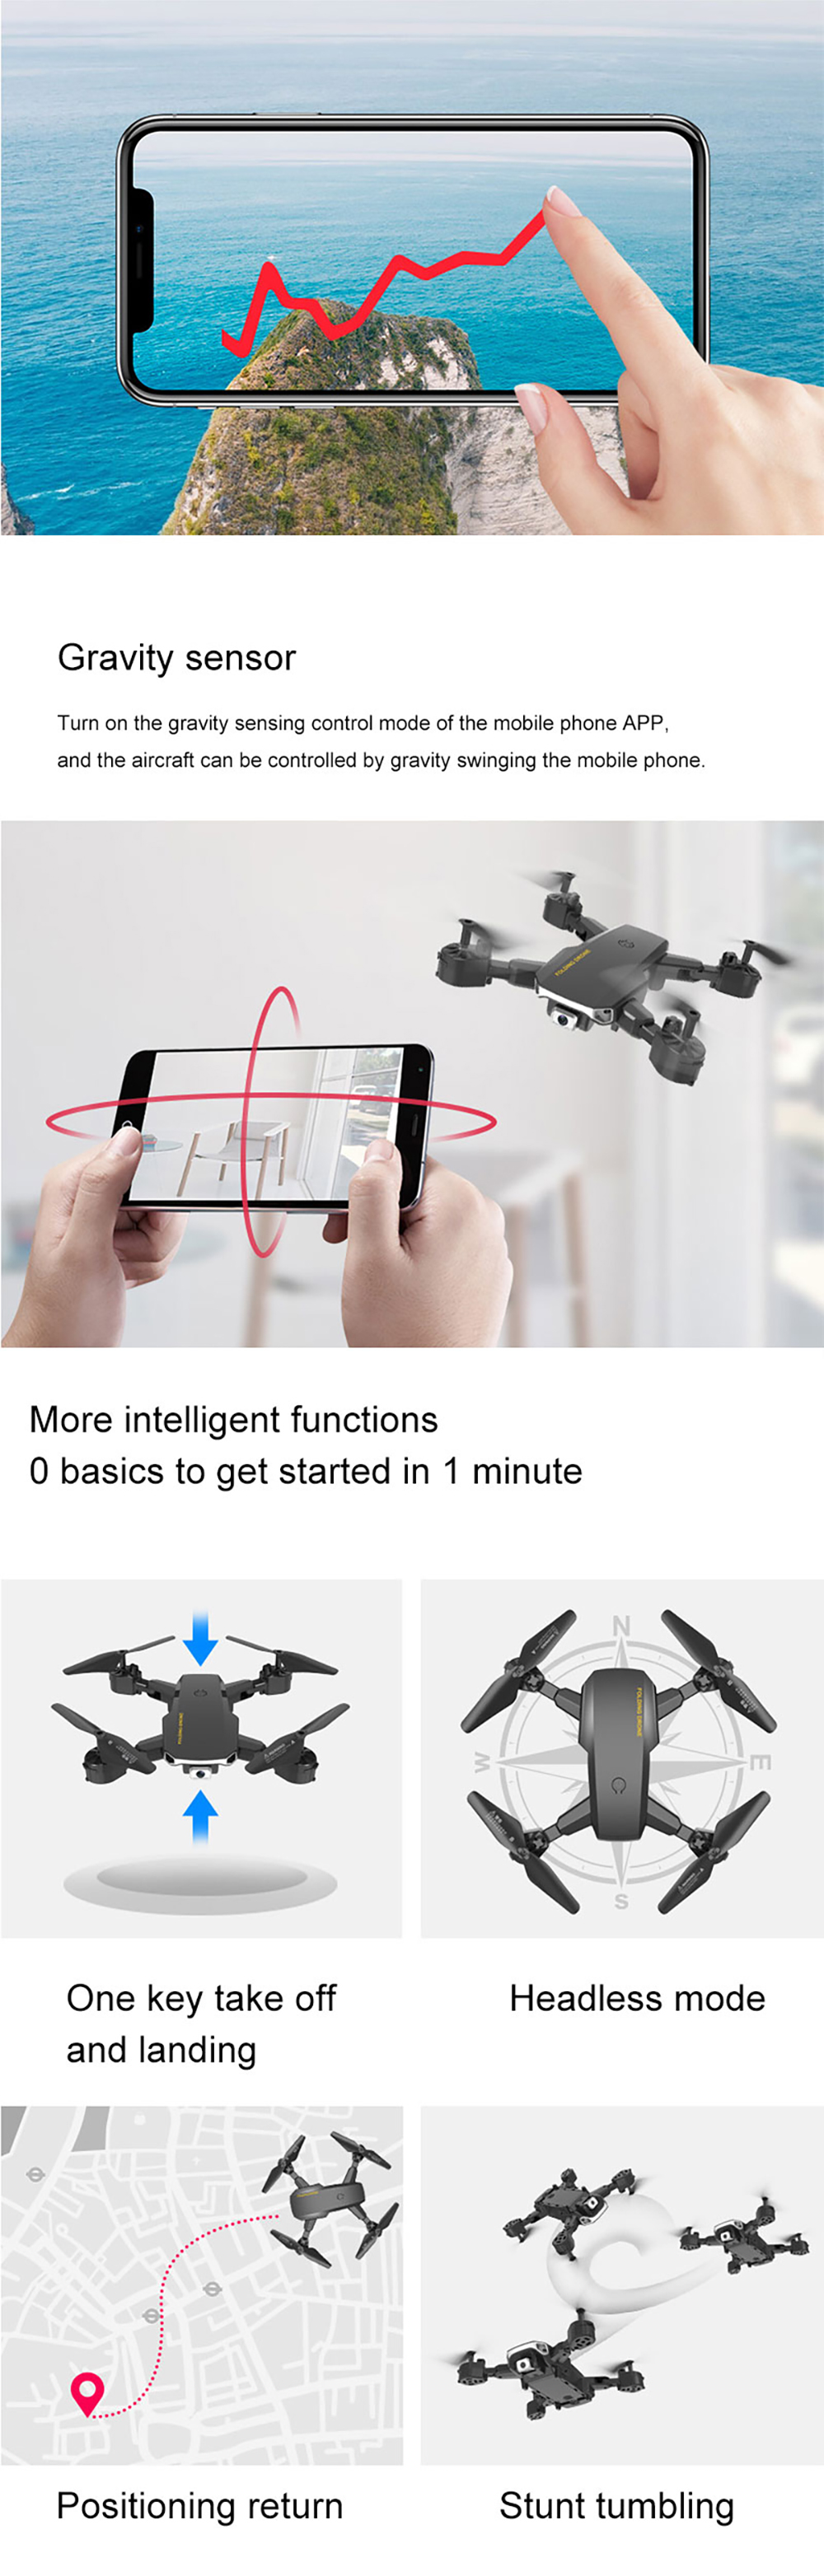 S60-Mini-Drone-WIFI-FPV-with-4K-HD-Camera-Optical-Flow-Positioning-15mins-Flight-Time-Foldable-RC-Qu-1775566-7